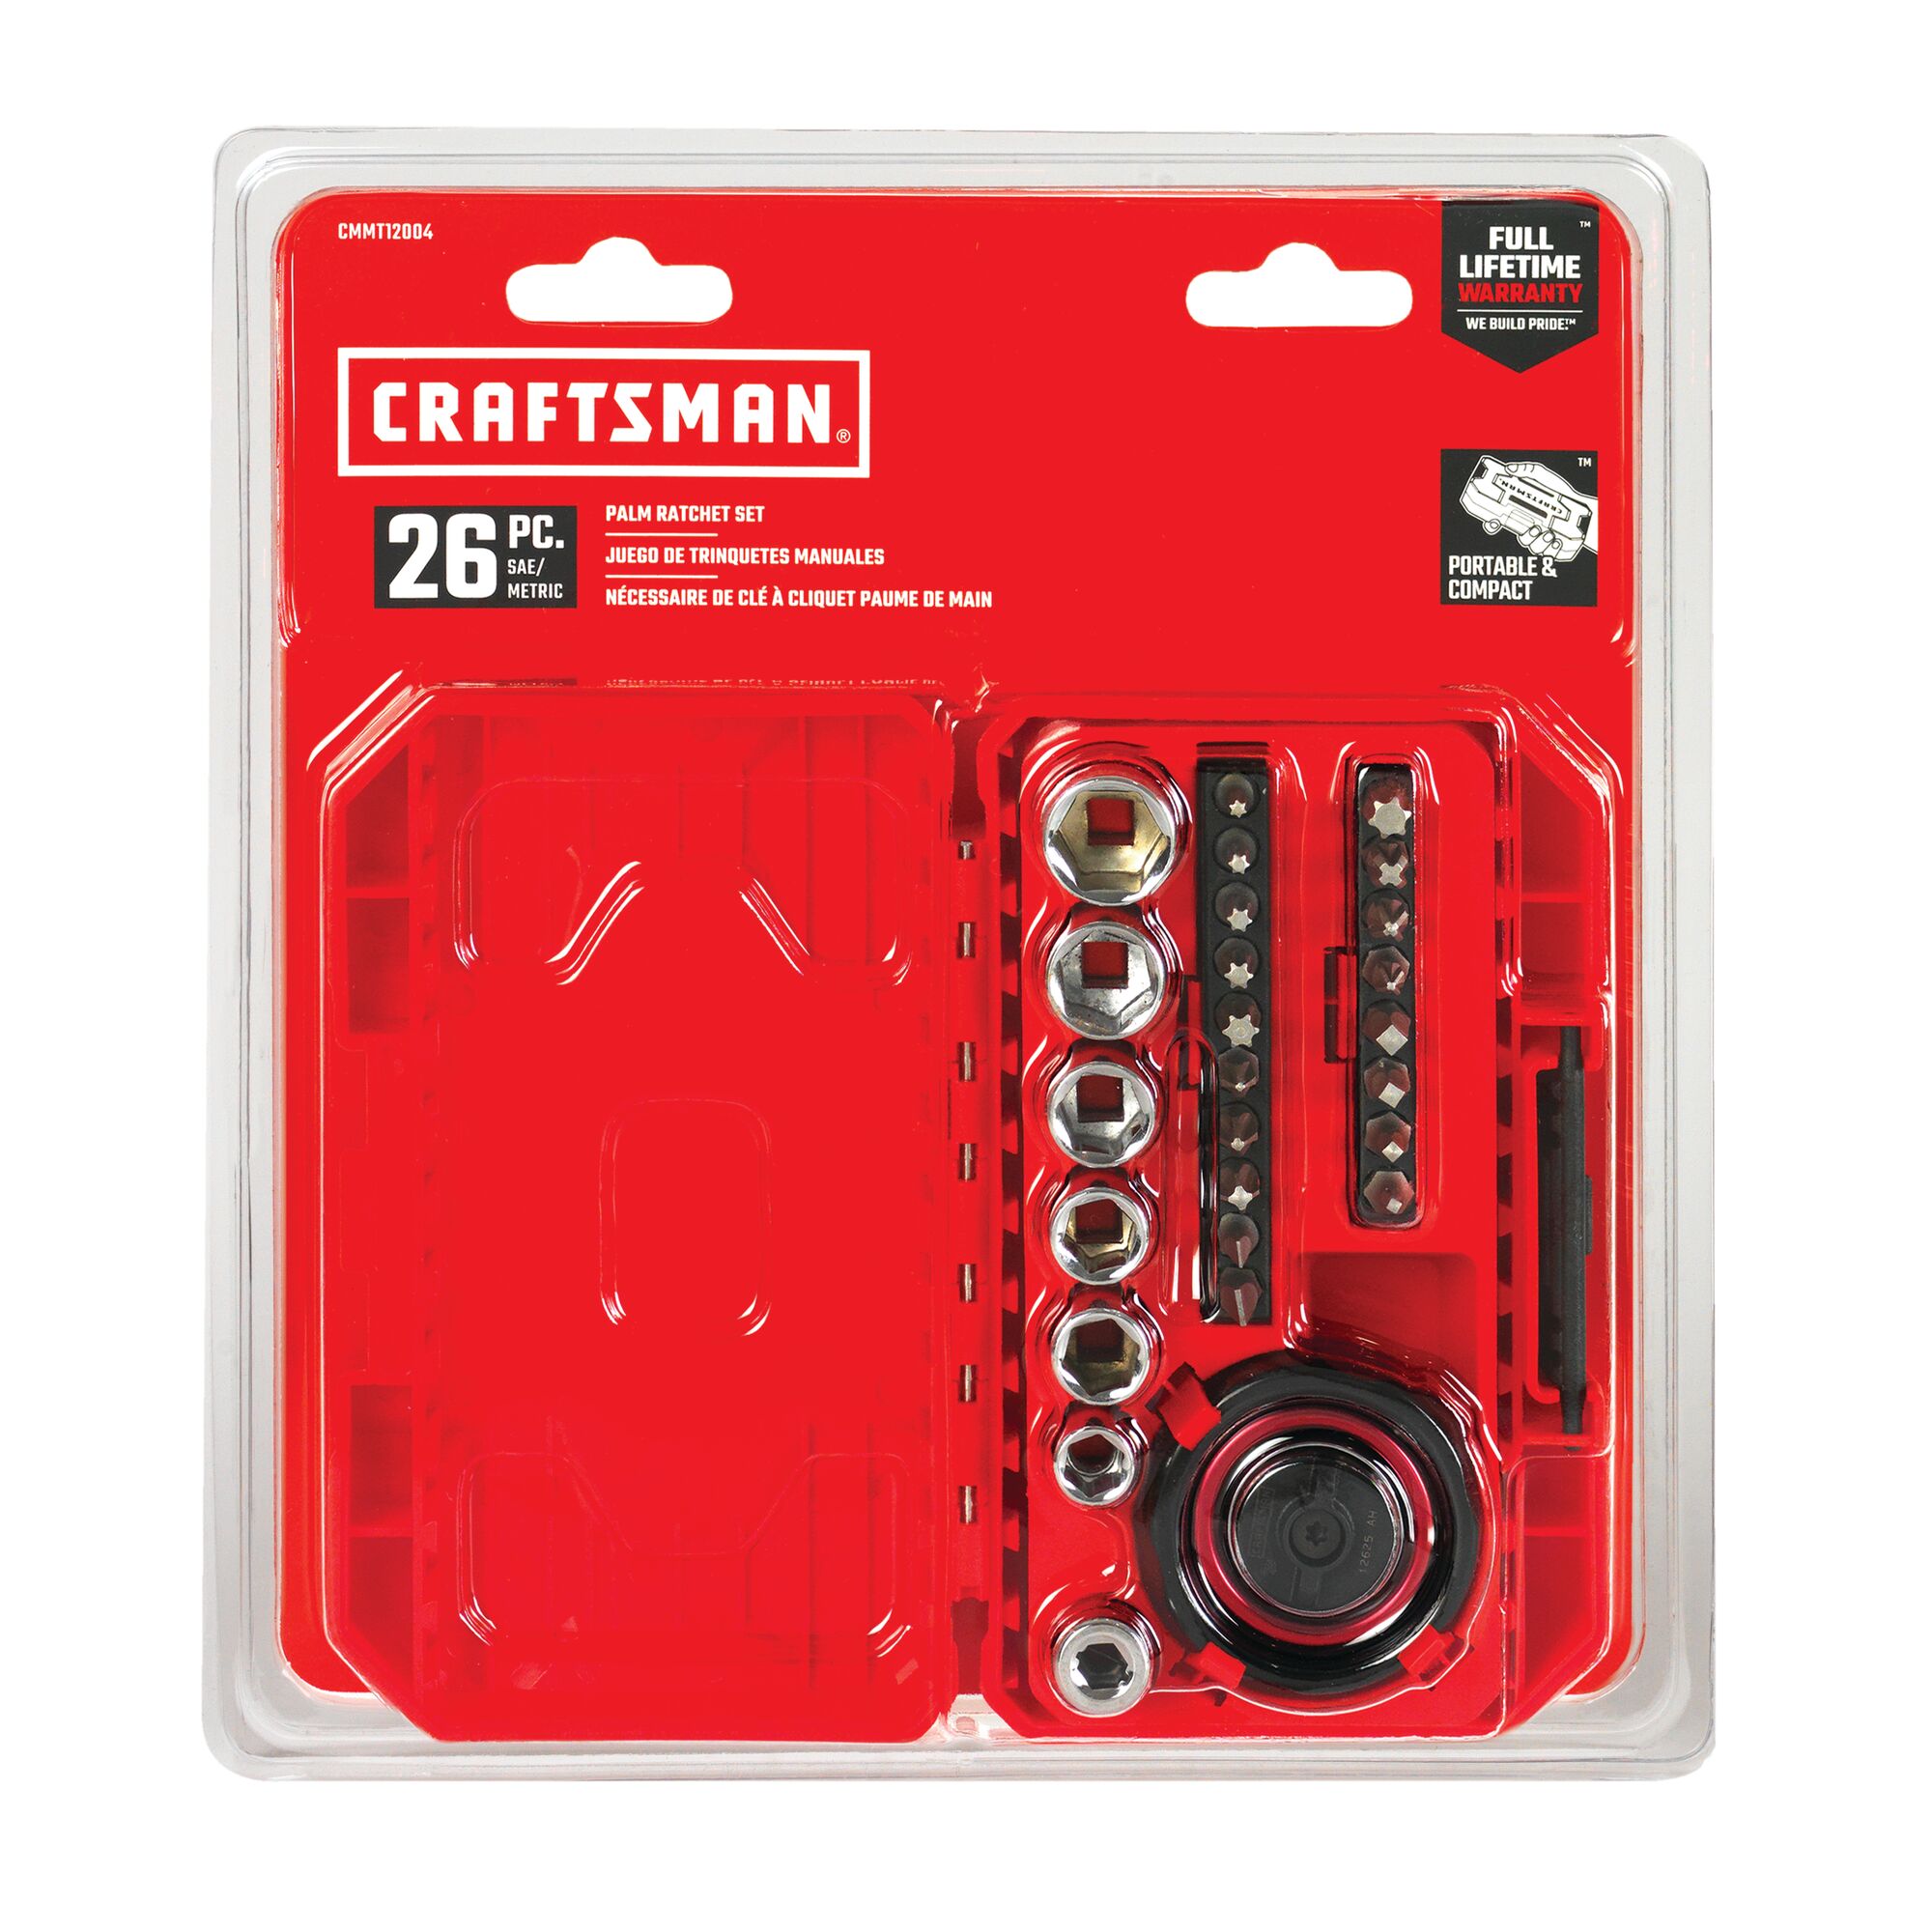 View of CRAFTSMAN Sockets: 6-Point packaging